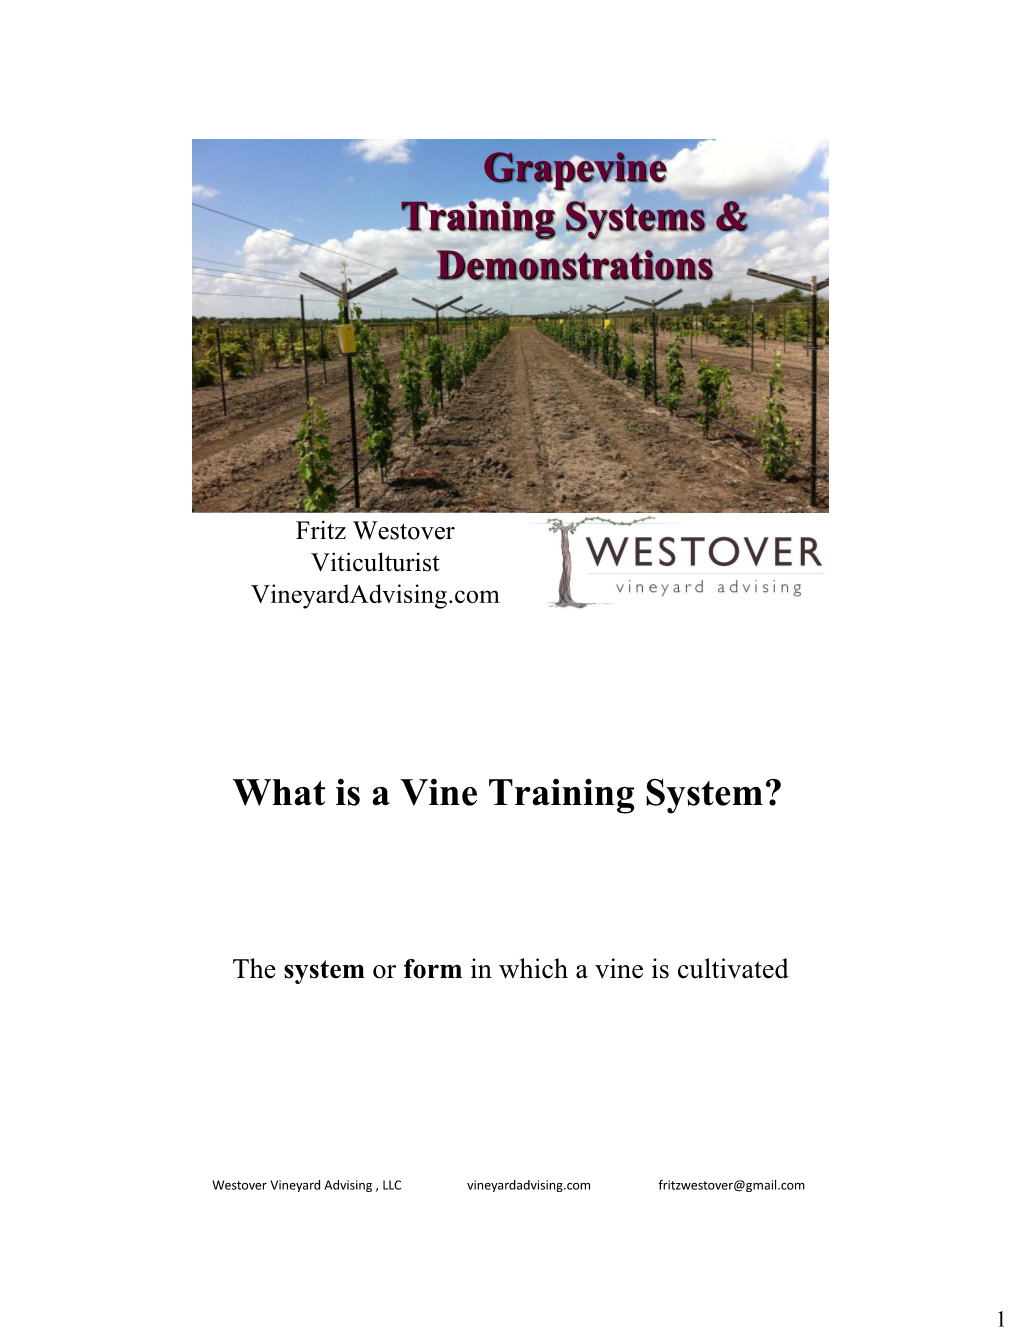 What Is a Vine Training System?